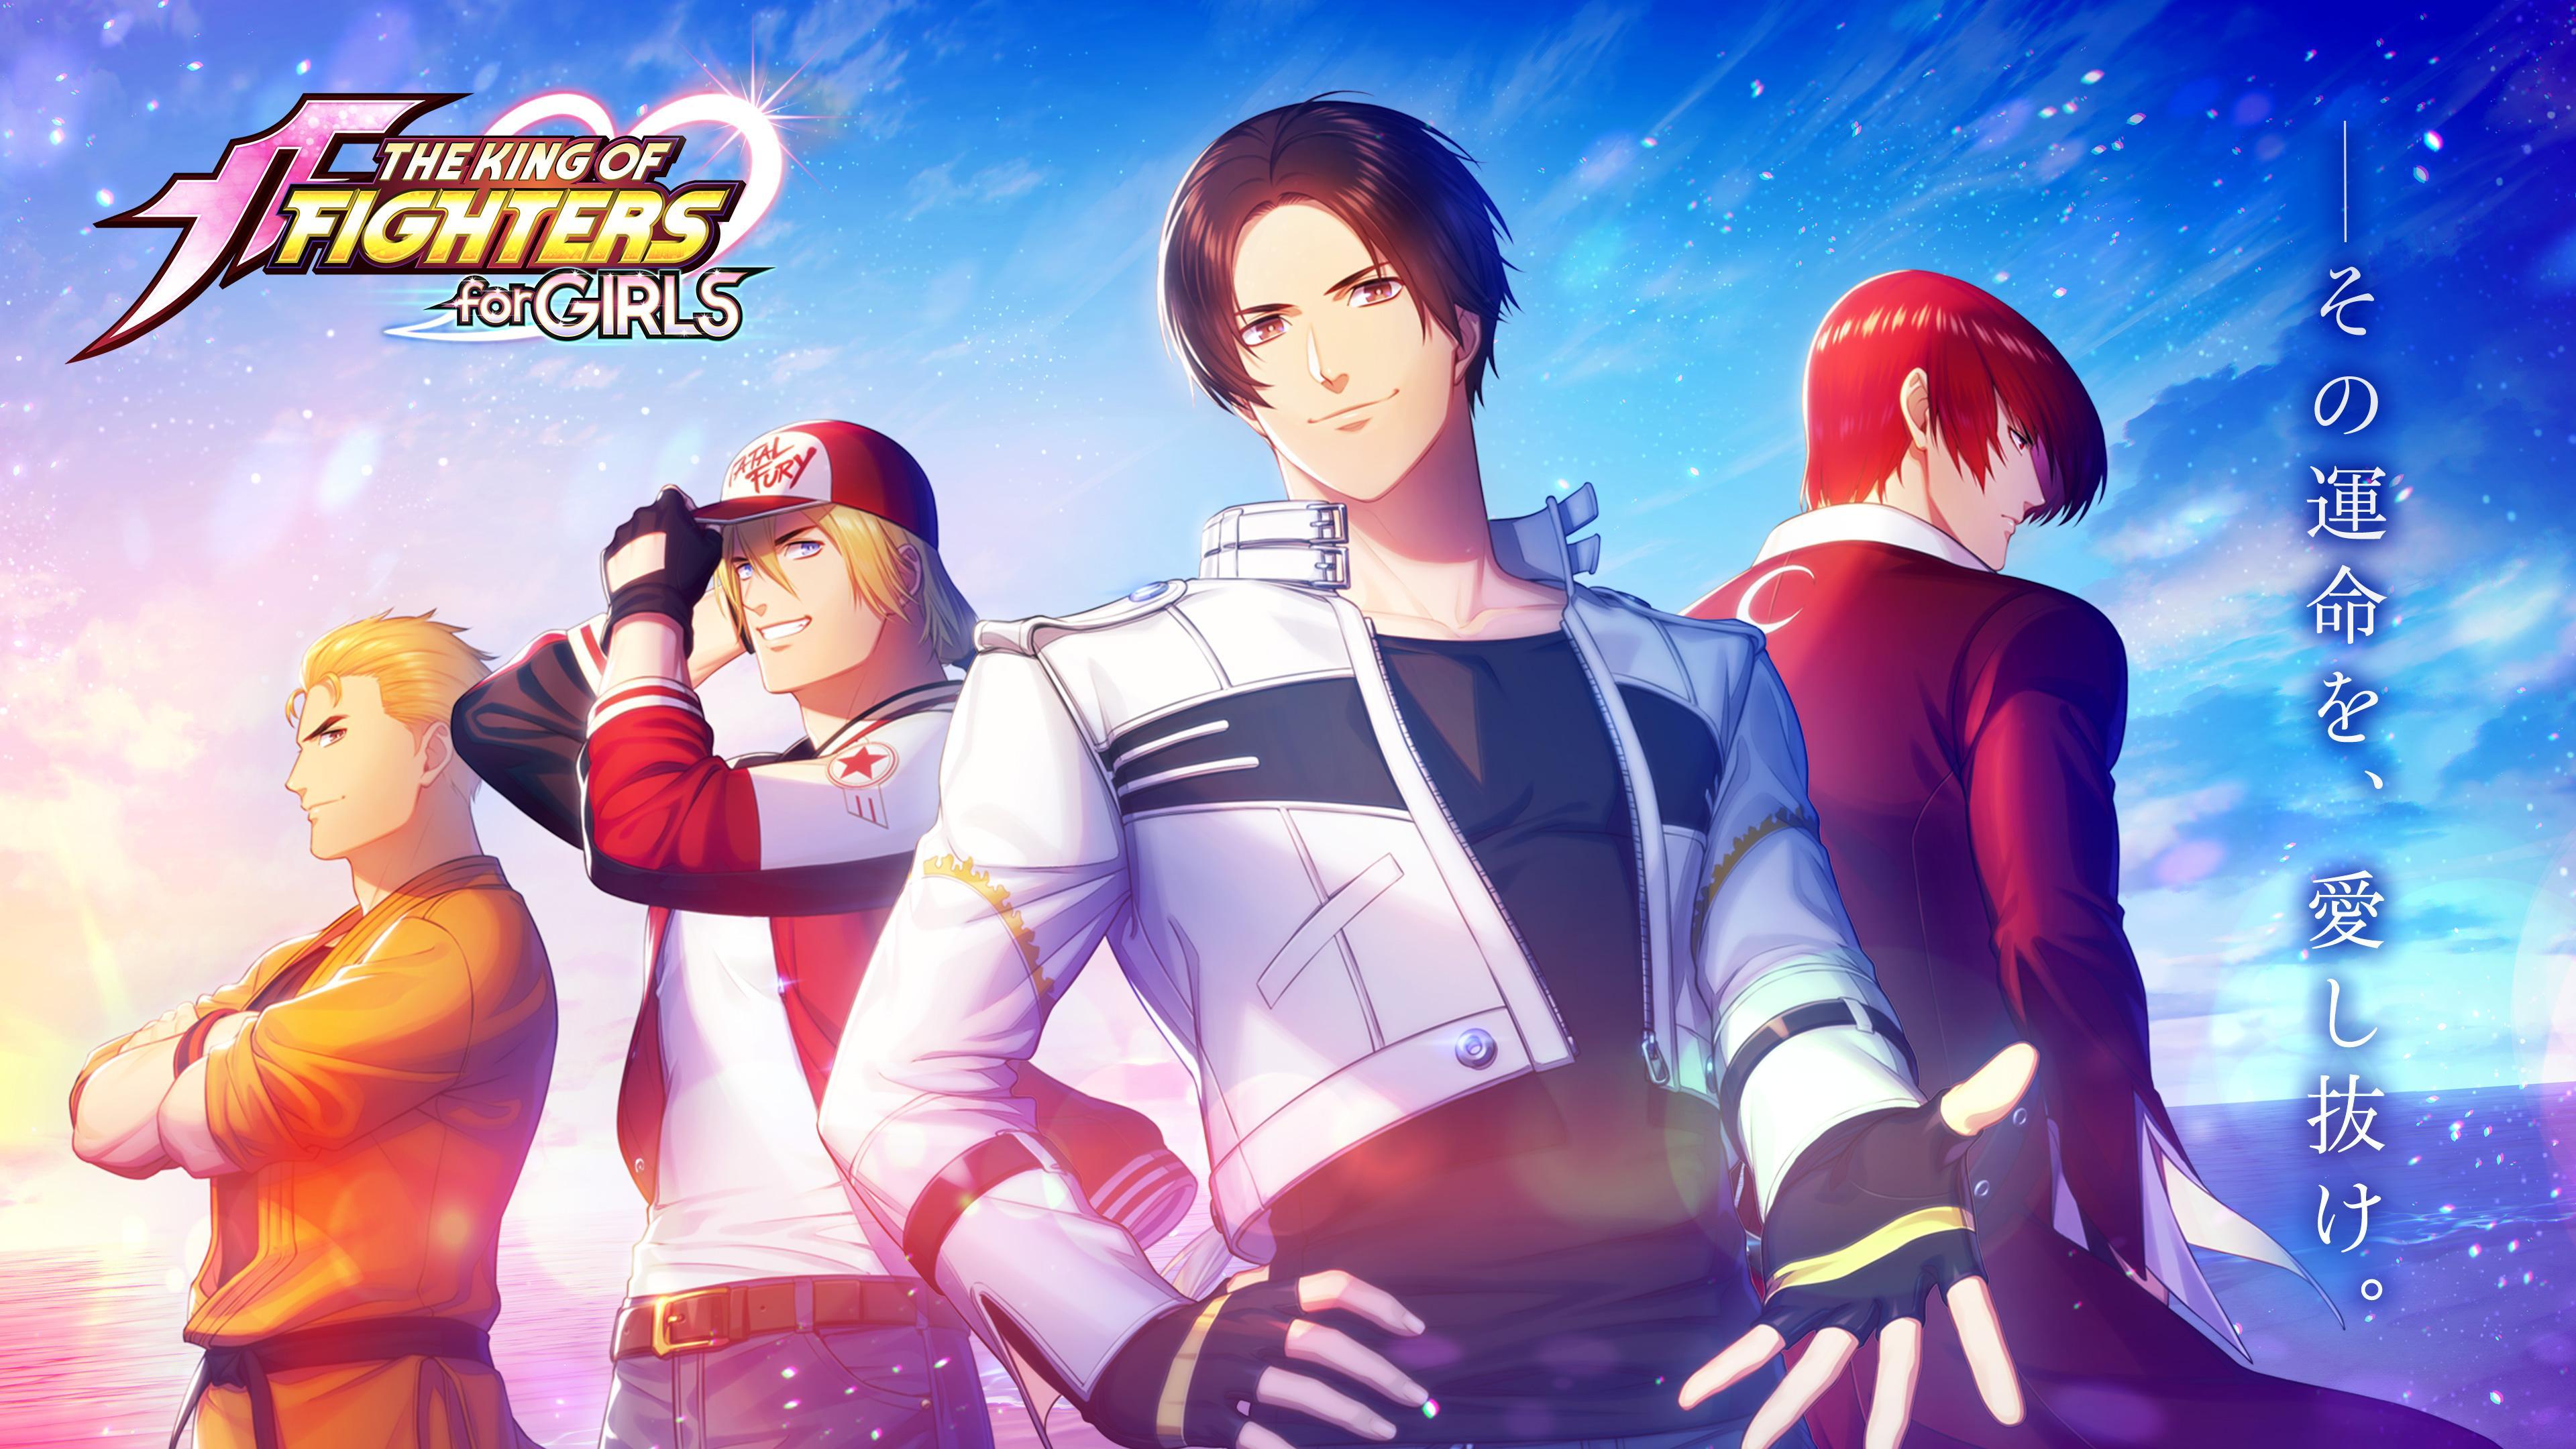 The King Of Fighters For Girls安卓下载 安卓版apk 免费下载